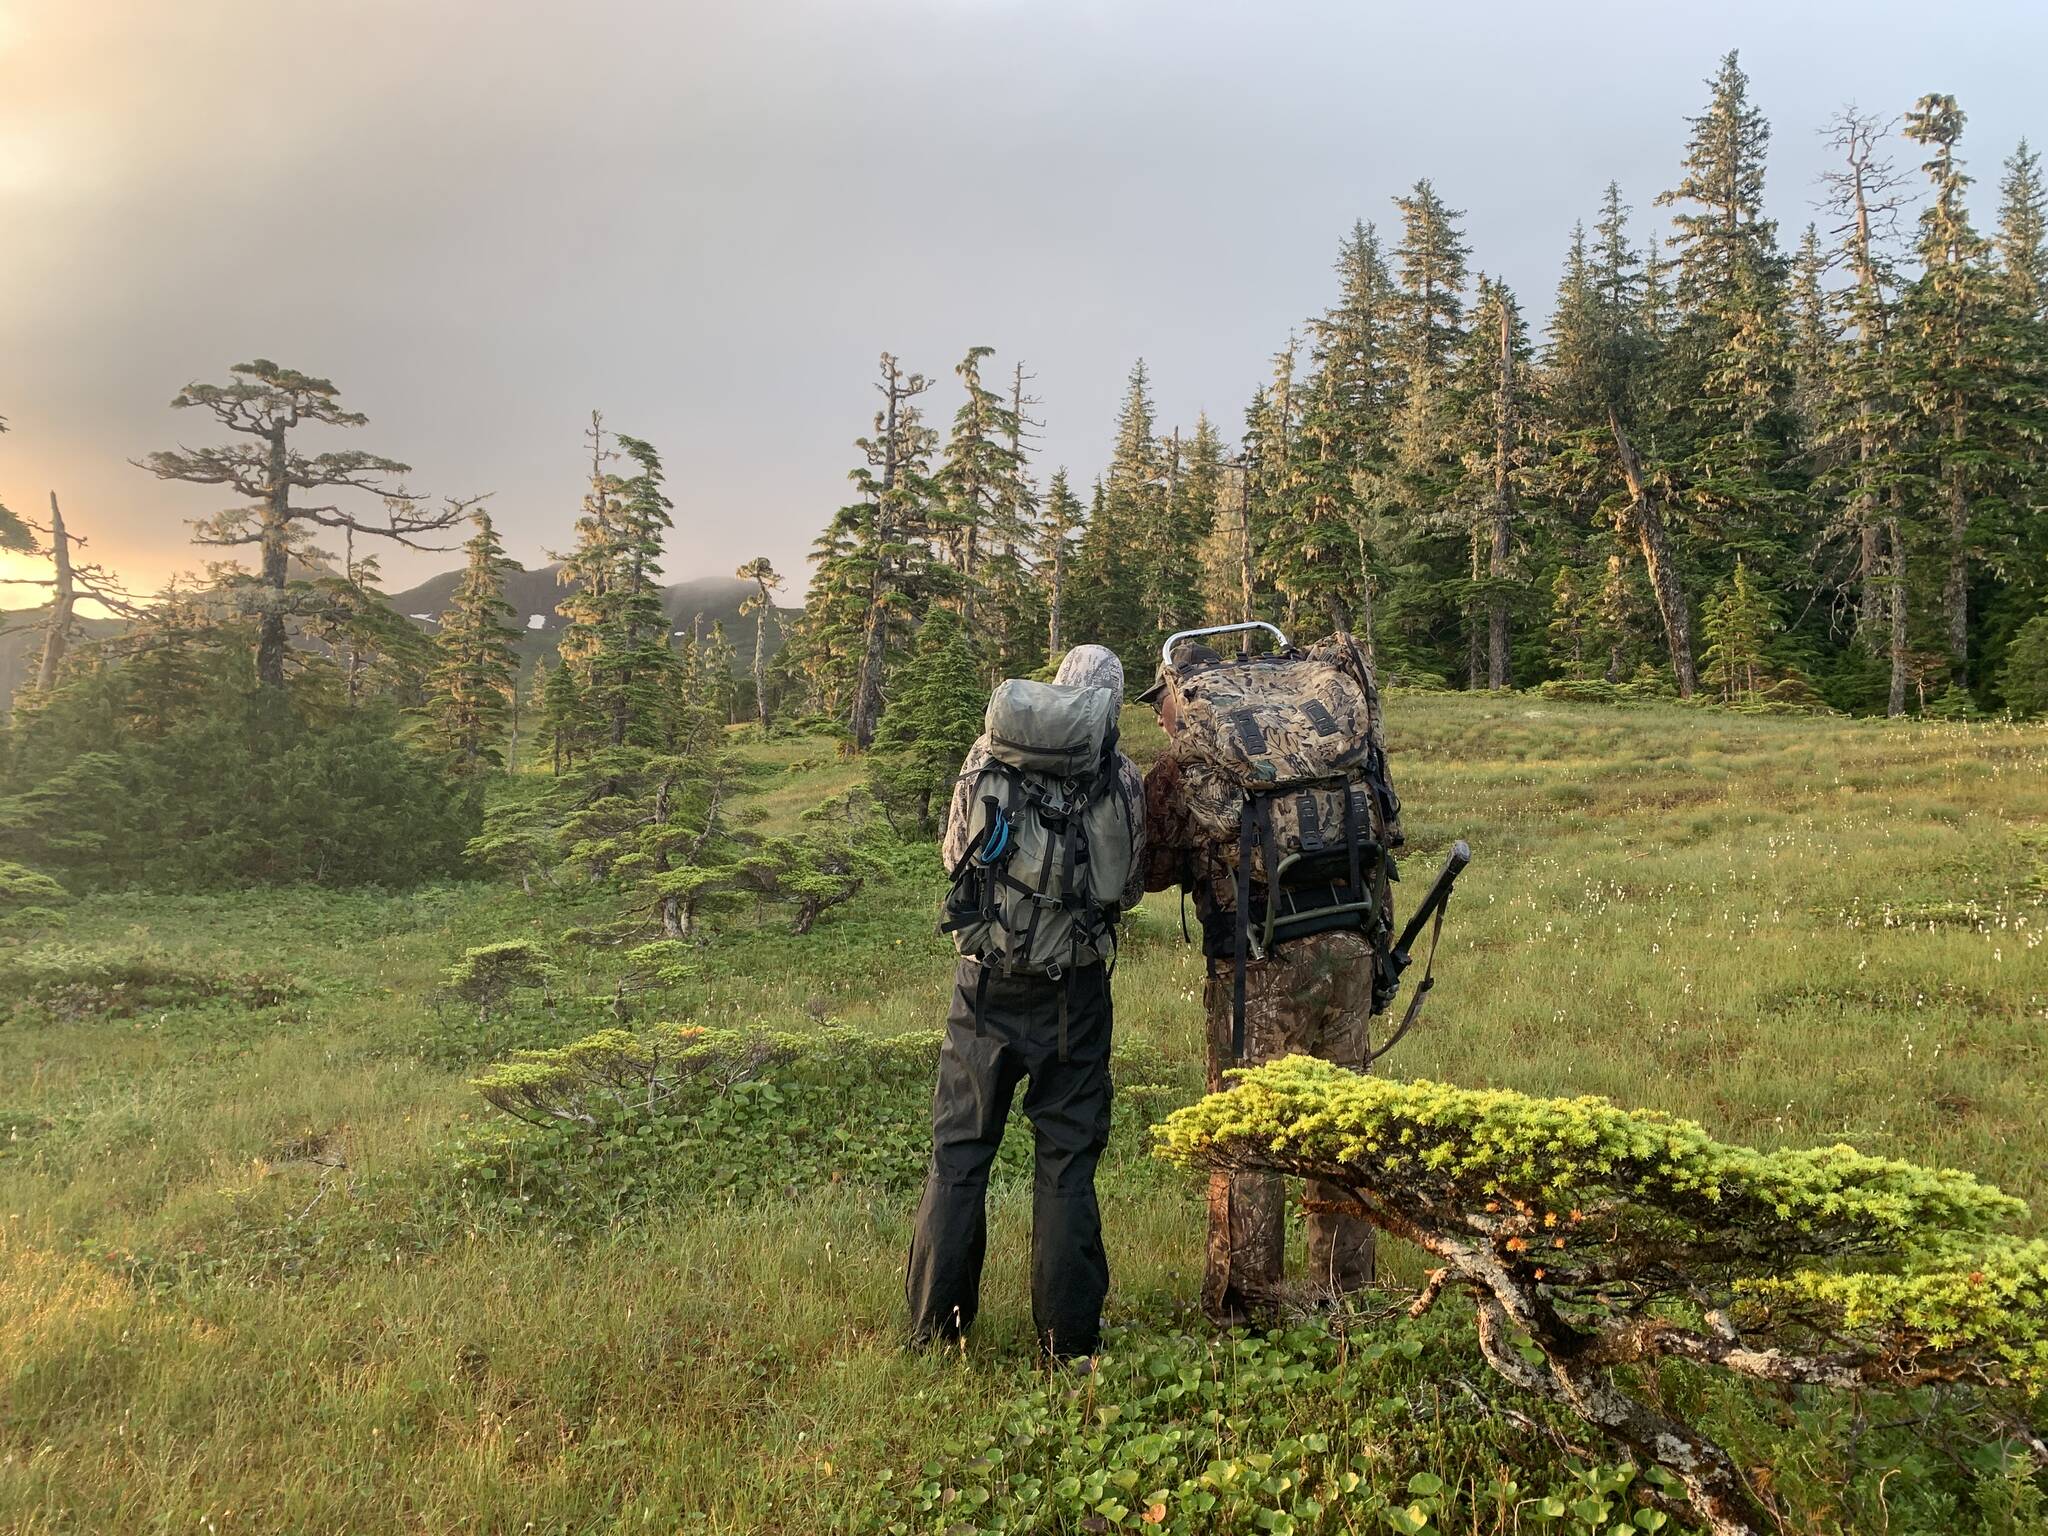 The author and his high school basketball coach Don Busse, survey a map of a mountain in the early light of Aug. 16, opening day for non-federally qualified users on parts of Prince of Wales Island where Jeff Lund grew up. (Jeff Lund / For the Juneau Empire)